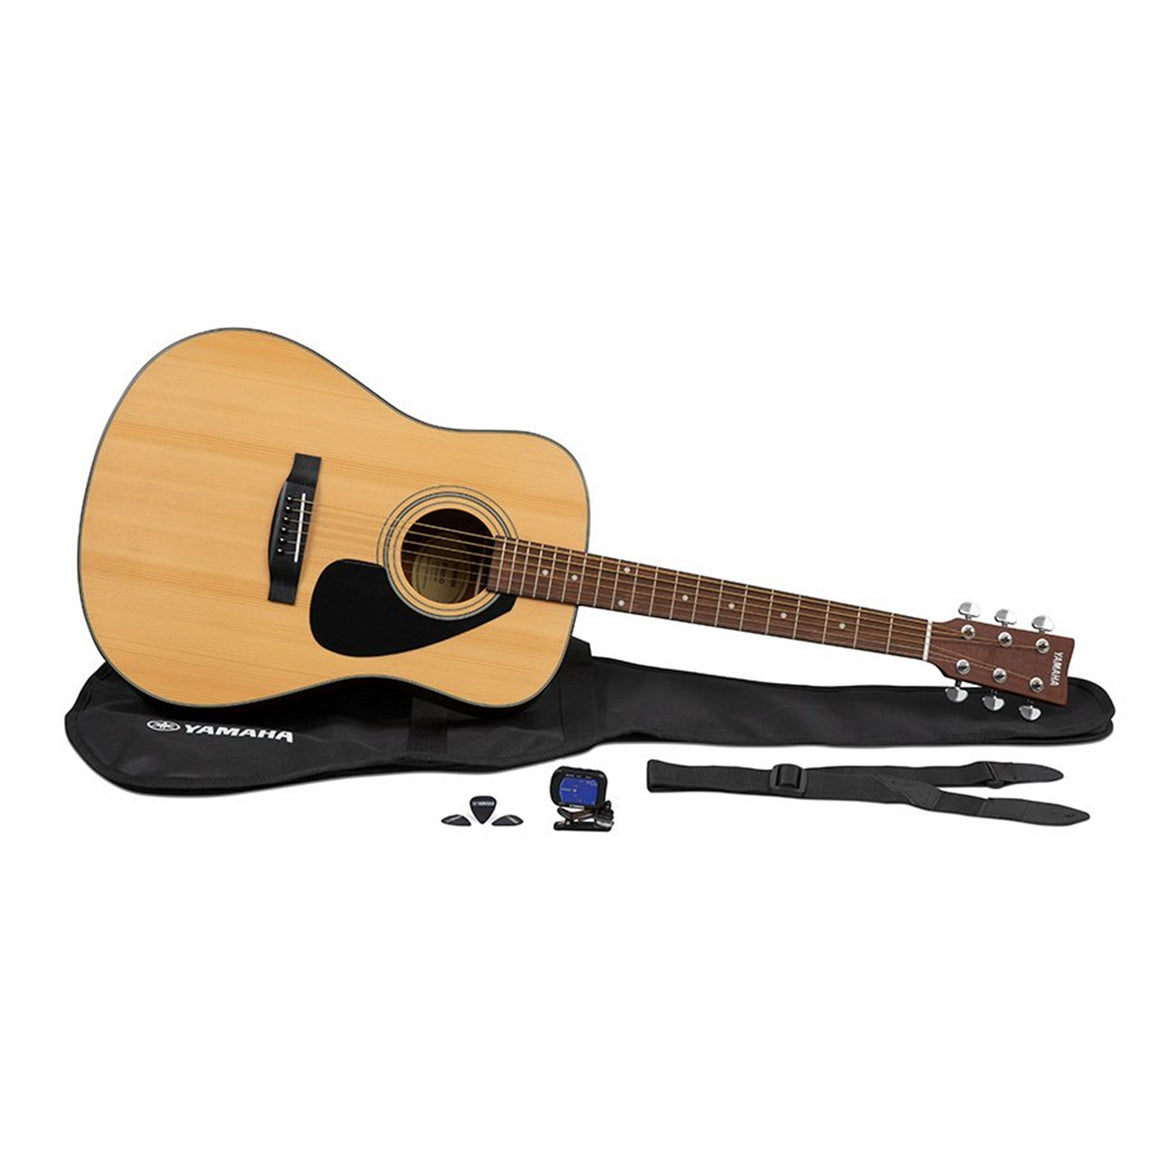 YAMAHA GIGMAKERDLX Gigmaker Dreadnought Acoustic Guitar Starter Pack (Natural)